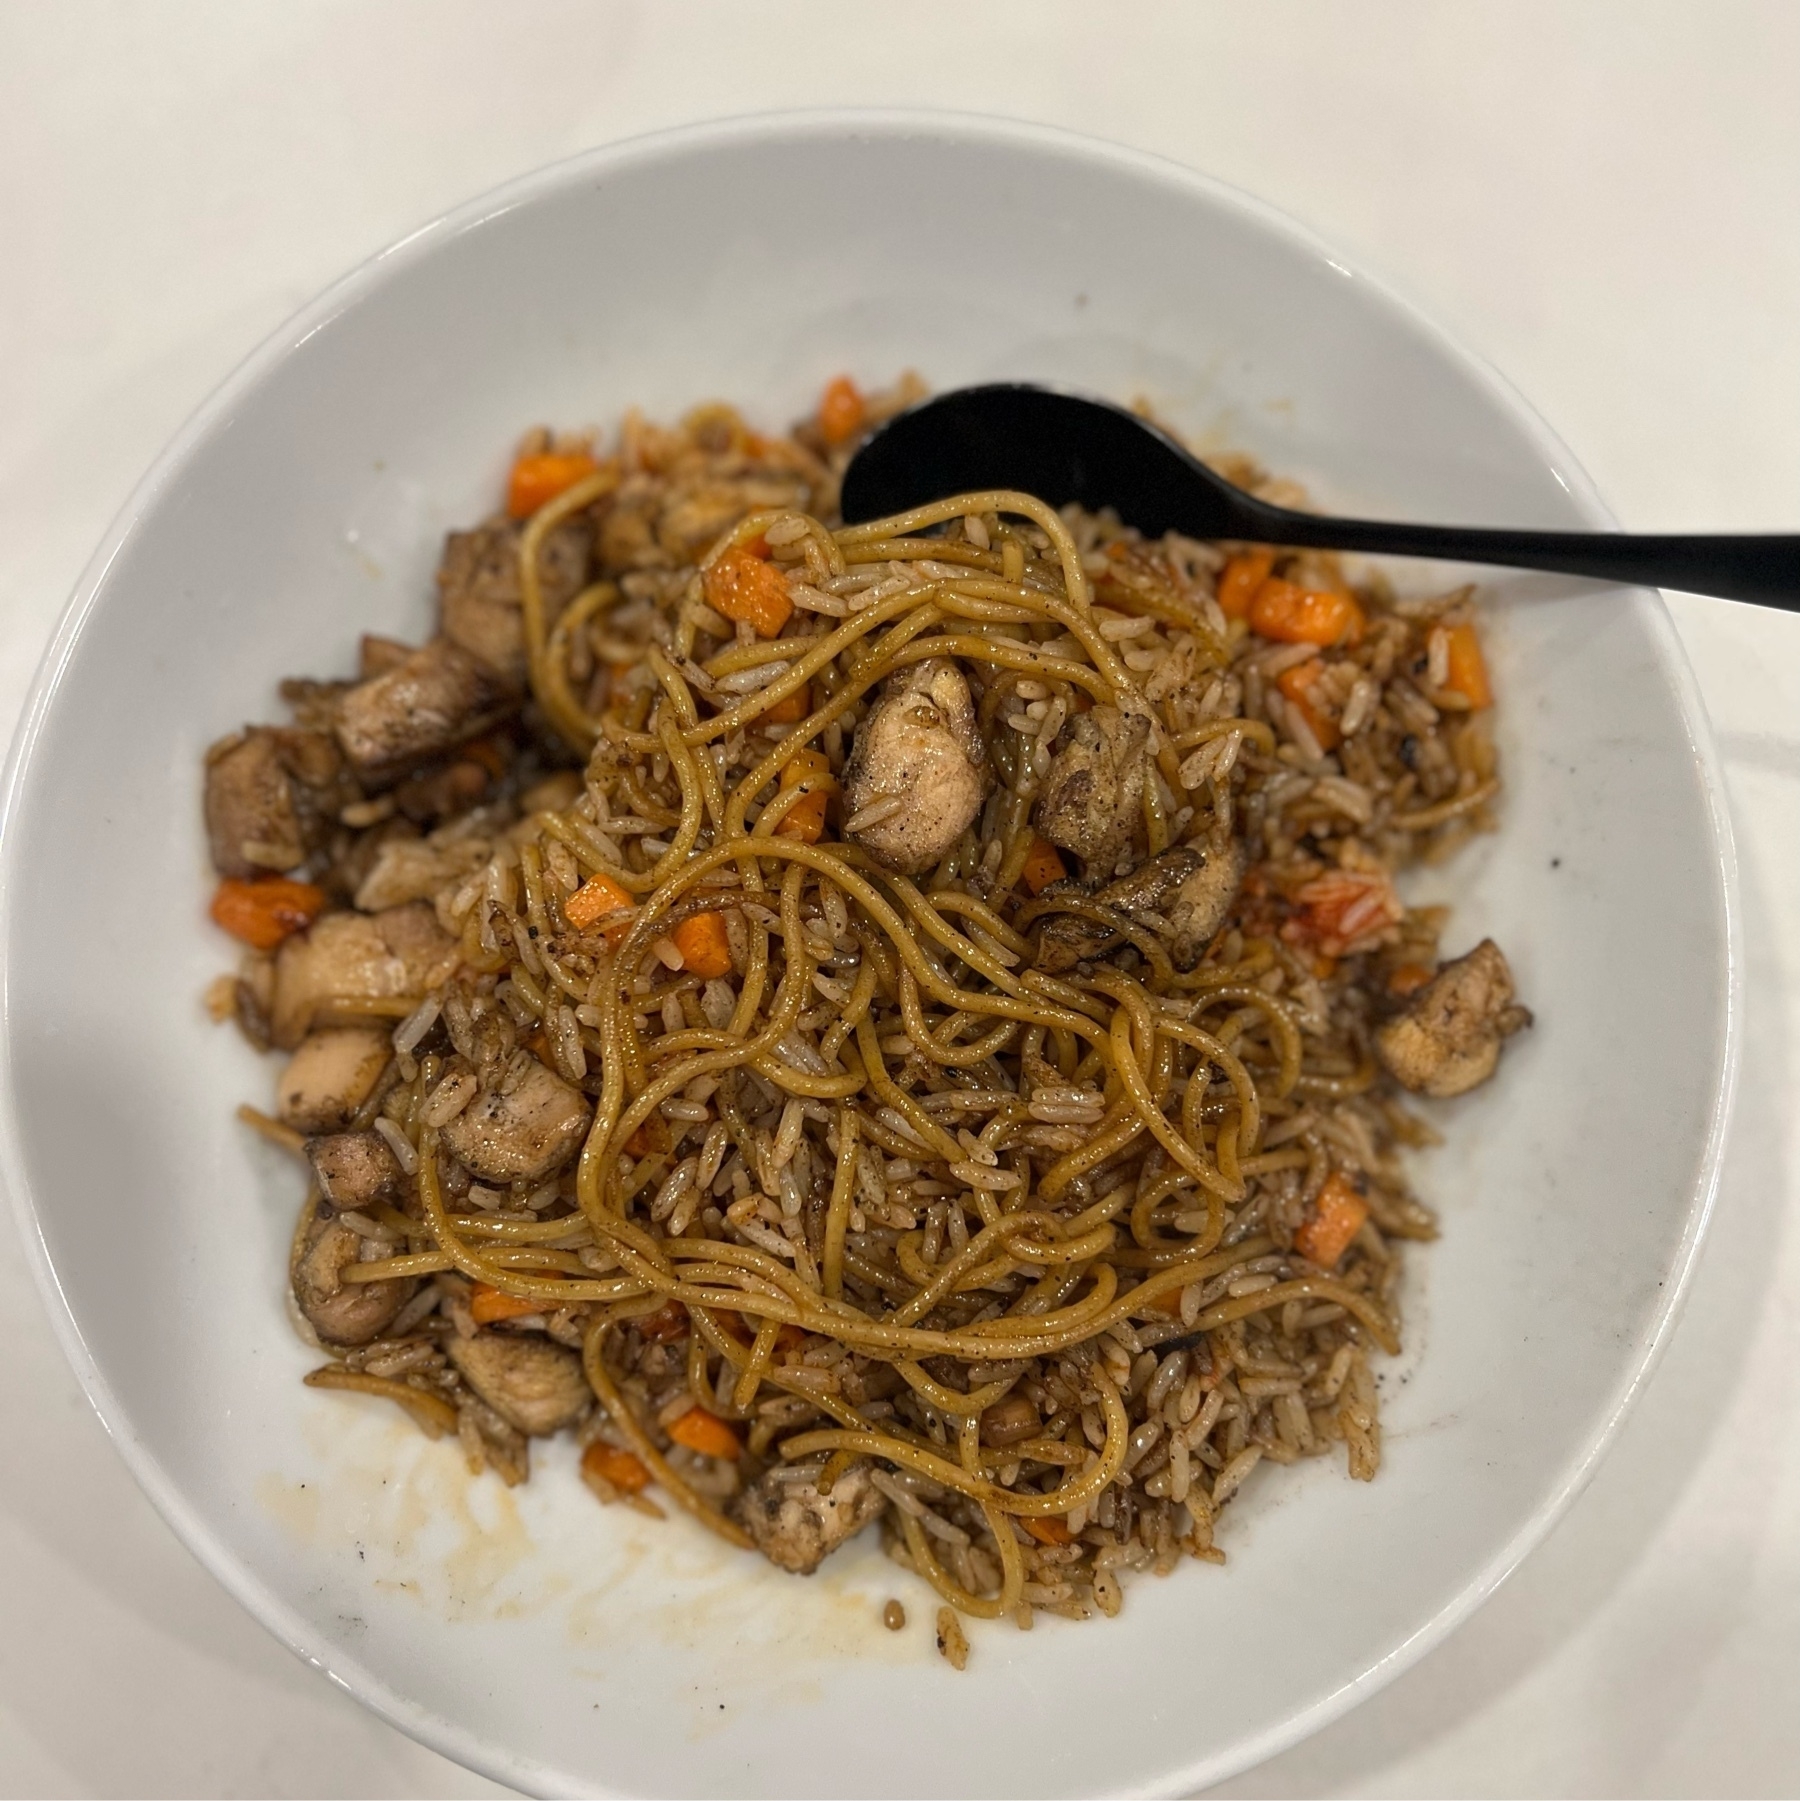 Stirfried rice and noodles